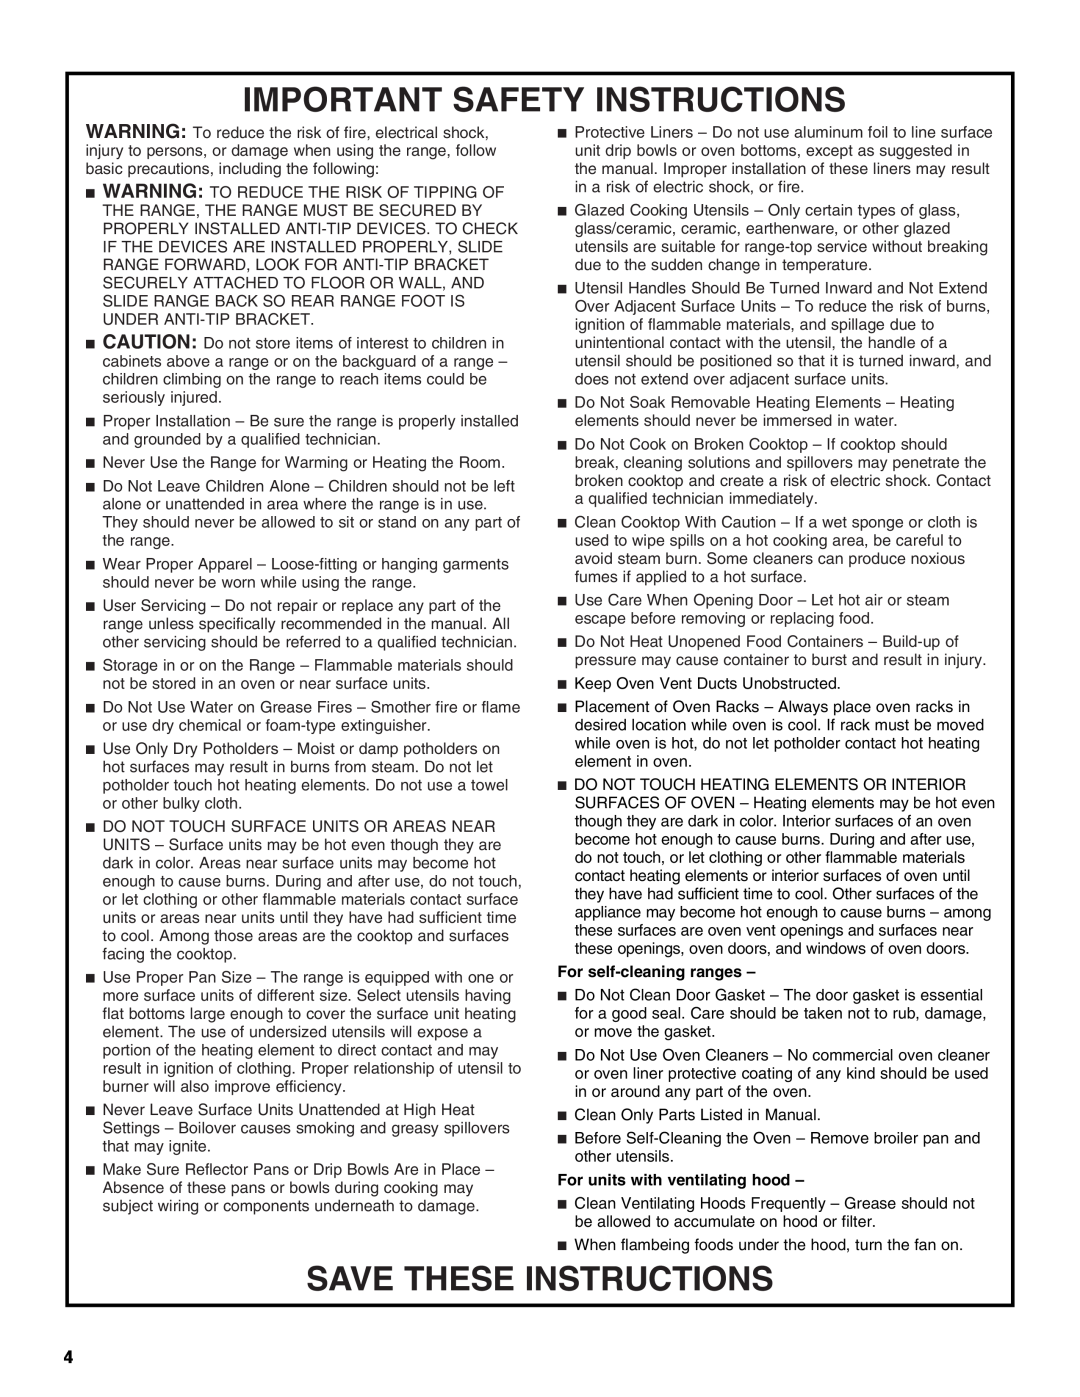 Jenn-Air JES8750, JES8860, JES8850 manual Important Safety Instructions, Save These Instructions, For self-cleaning ranges 